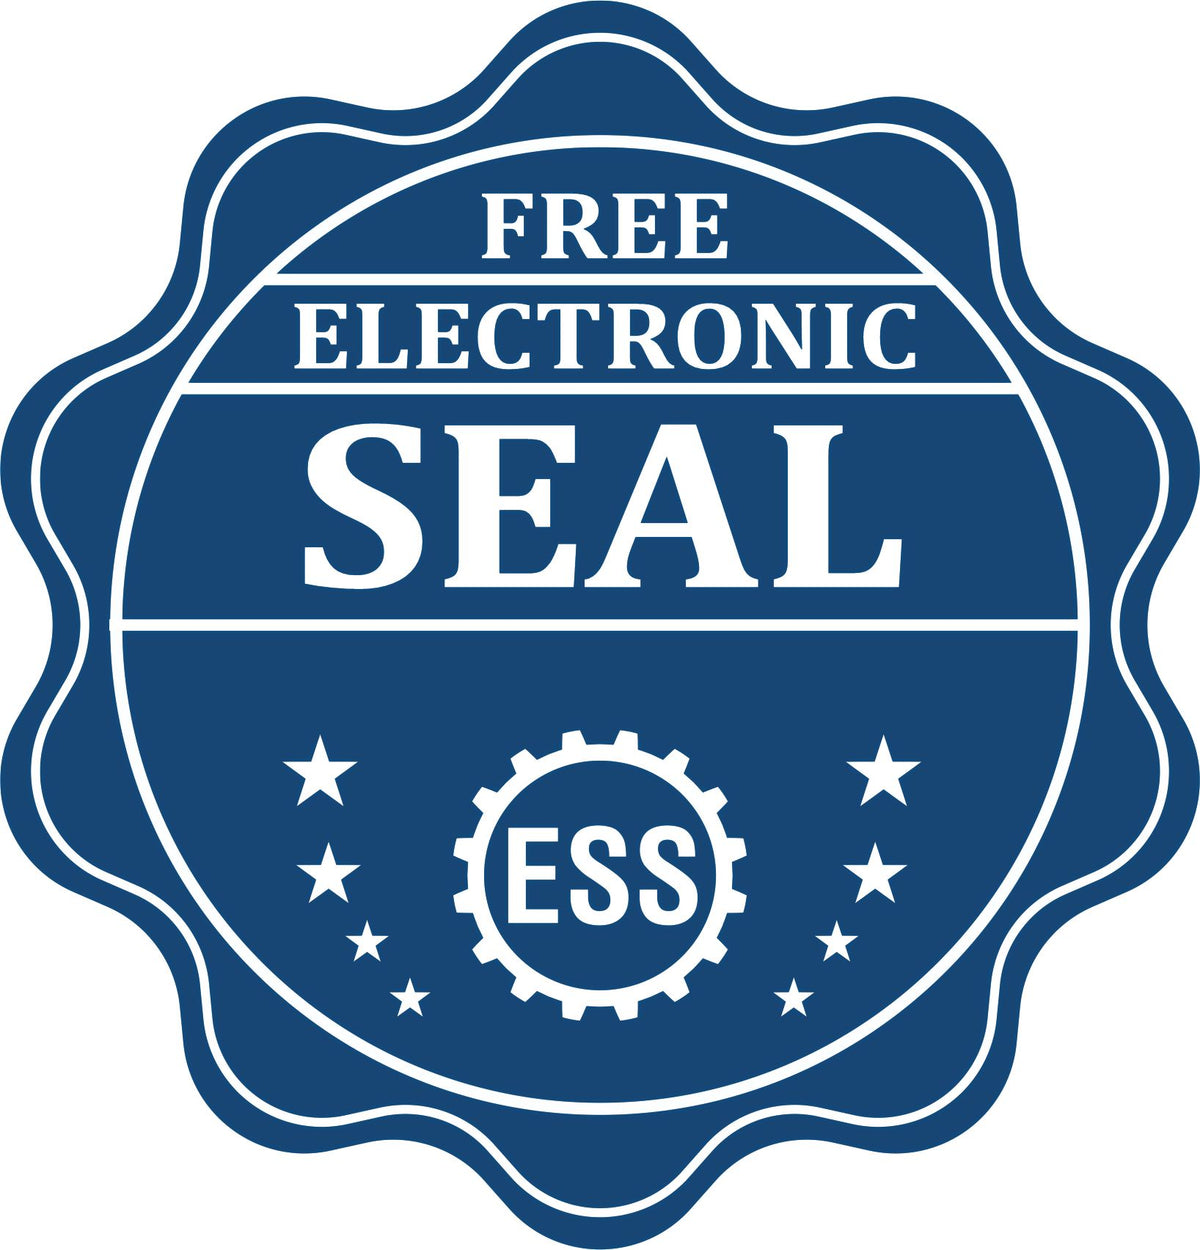 A badge showing a free electronic seal for the Handheld Wyoming Professional Geologist Embosser with stars and the ESS gear on the emblem.